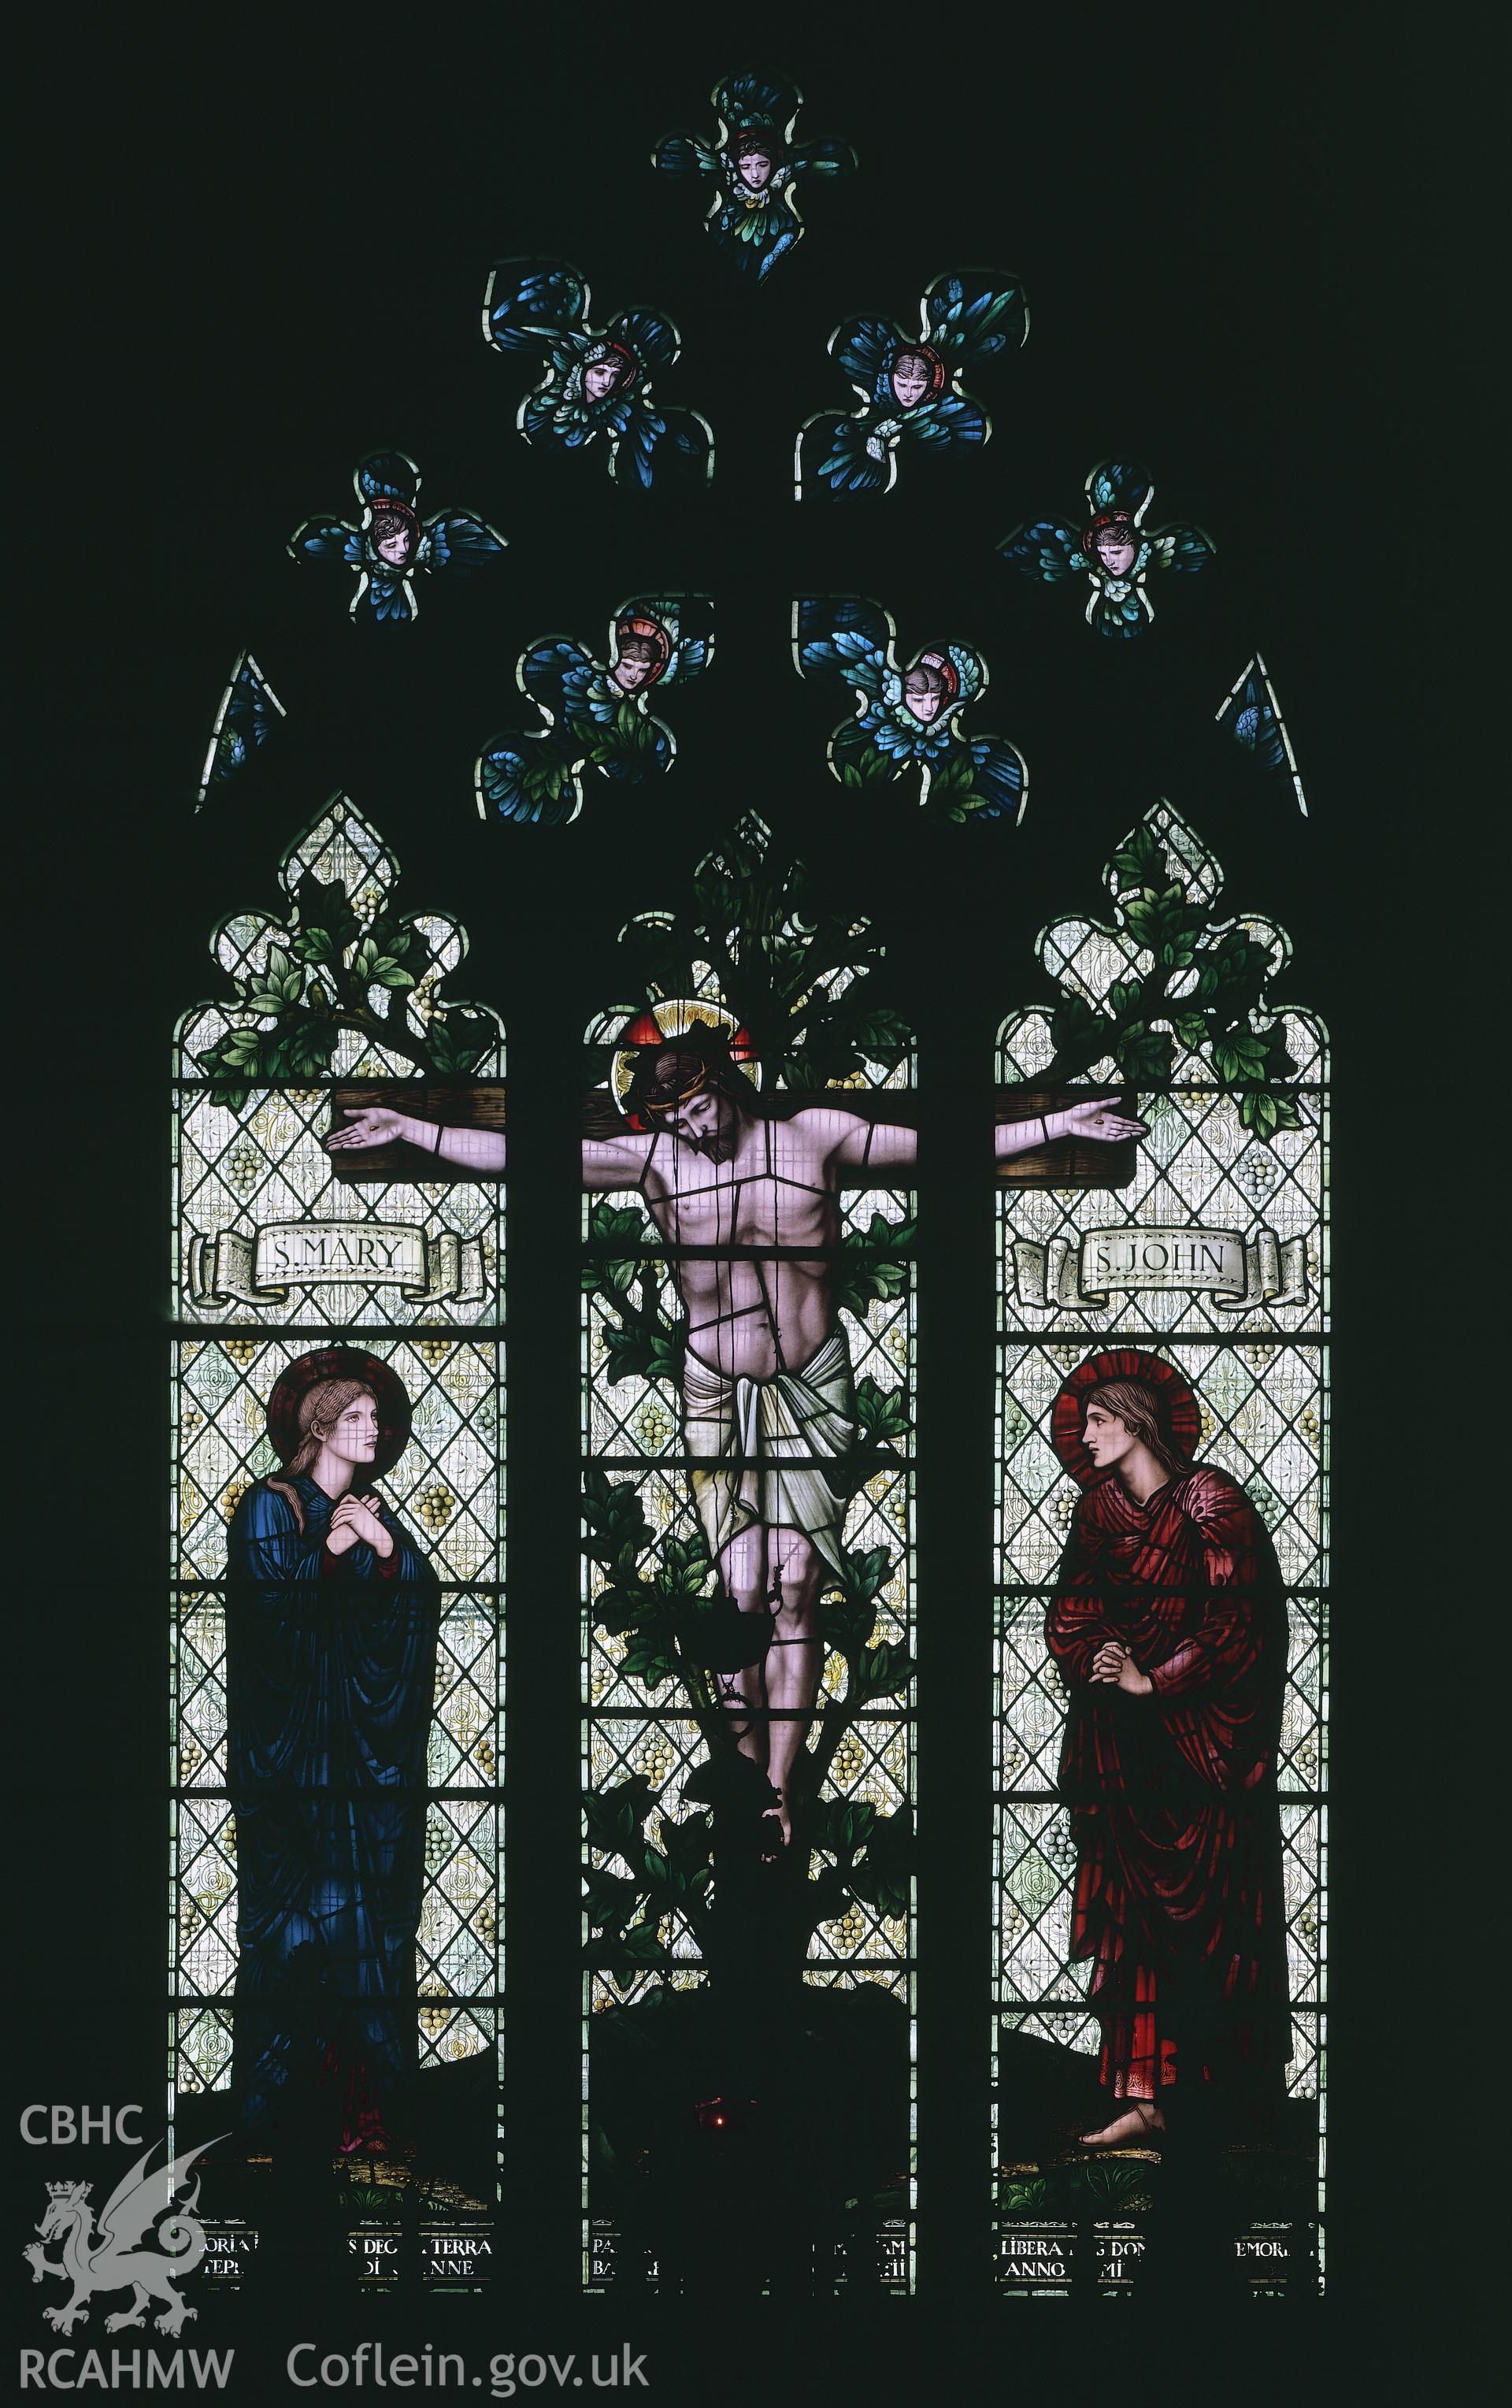 RCAHMW colour transparency of an interior view of a stained glass window depicting the crucifiction, designed by Edward Burne-Jones, at Hawarden Church.